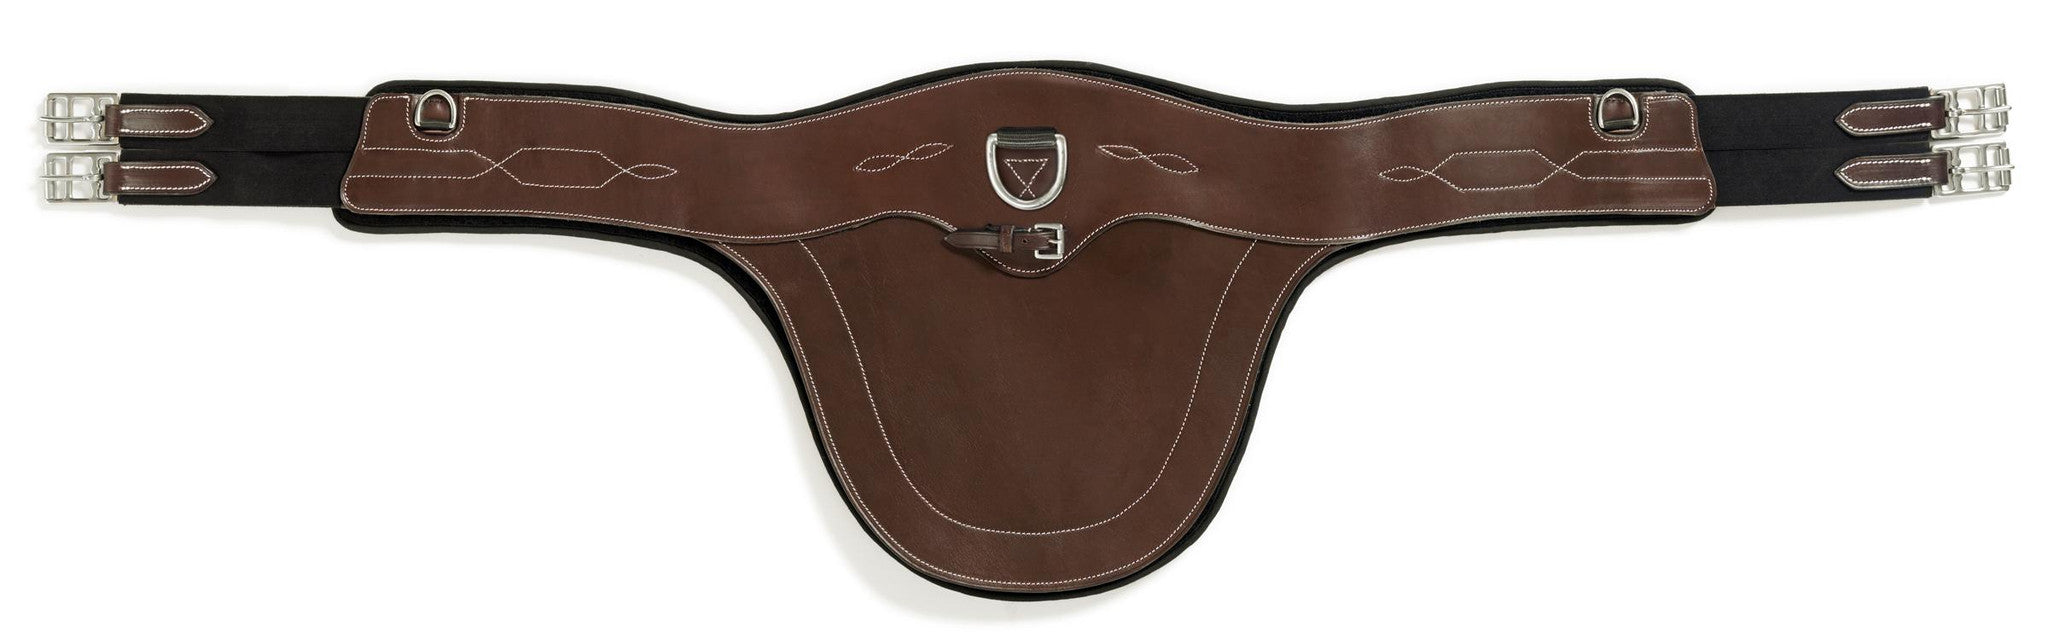 EquiFit Anatomical Belly Guard w/ T-Foam